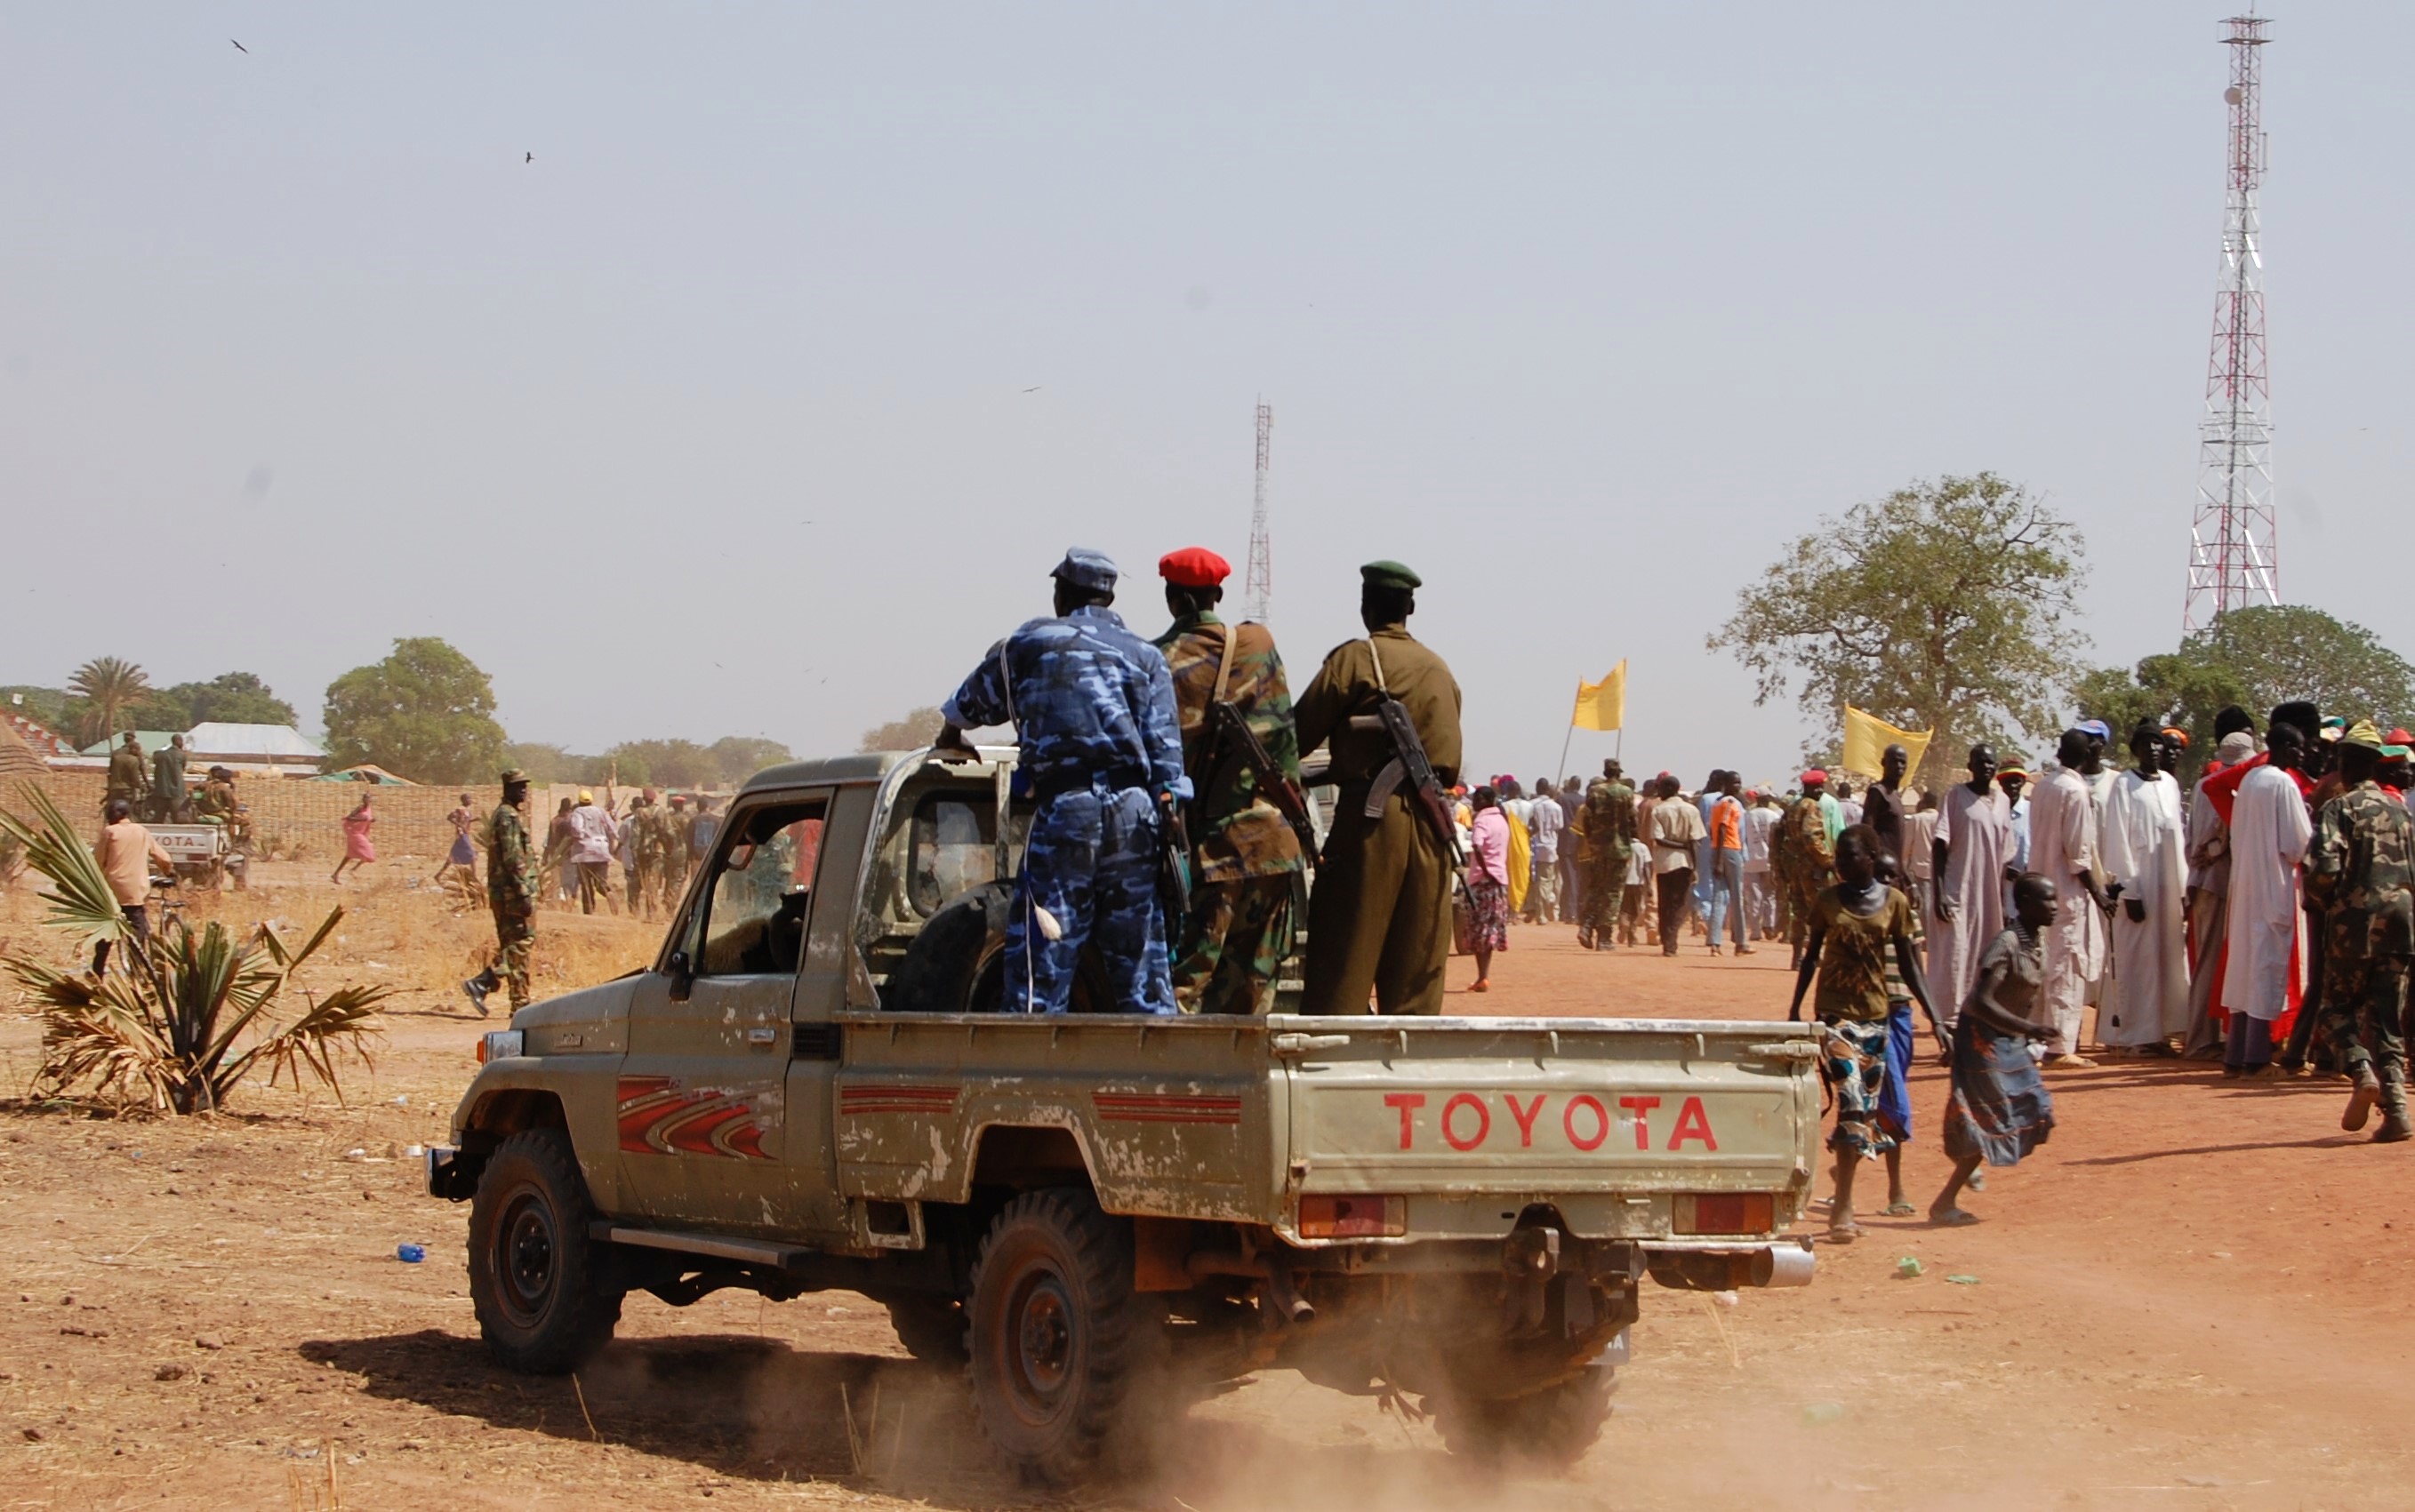  SPLM rally in Southern Sudan, 2010. (Image by U.S. Institute of Peace)